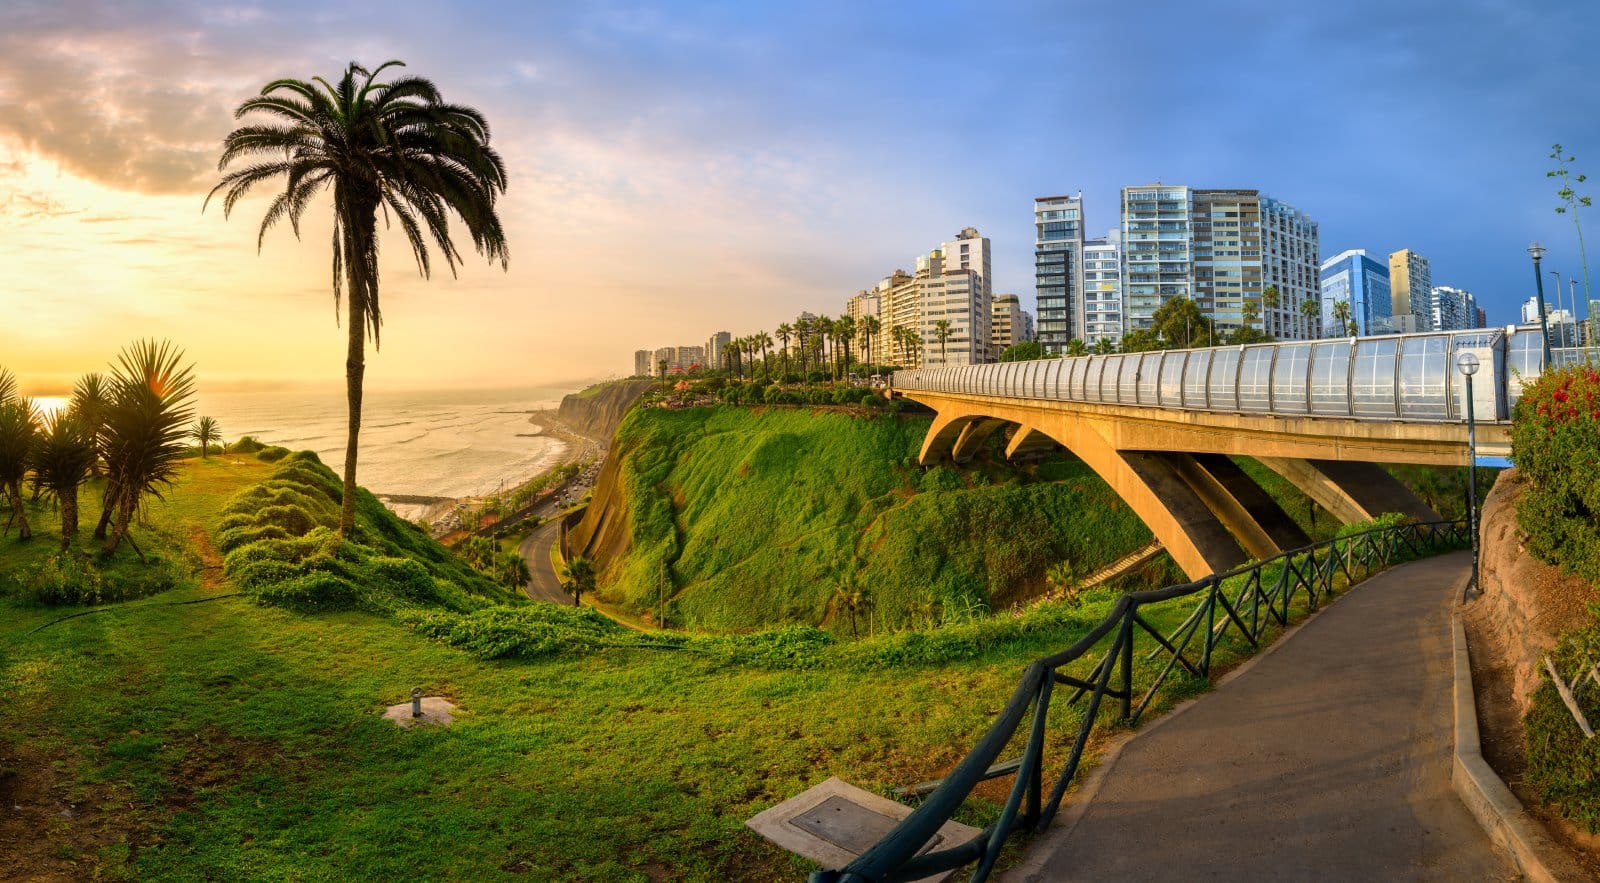 <p class="wp-caption-text">Image Credit: Shutterstock / Boris Stroujko</p>  <p><span>Miraflores is Lima’s most cosmopolitan district, known for its shopping areas, gardens, well-maintained parks, and stunning cliff-top views over the Pacific Ocean. Larcomar, a shopping center carved into the cliff face, offers retail therapy and panoramic ocean views.</span></p> <p><span>Parque Kennedy, the district’s central park, is famous for its resident cats and bustling street food vendors, offering a taste of local life. Miraflores is also home to Huaca Pucllana, a pre-Incan adobe pyramid that contrasts sharply with the modernity surrounding it.</span></p>